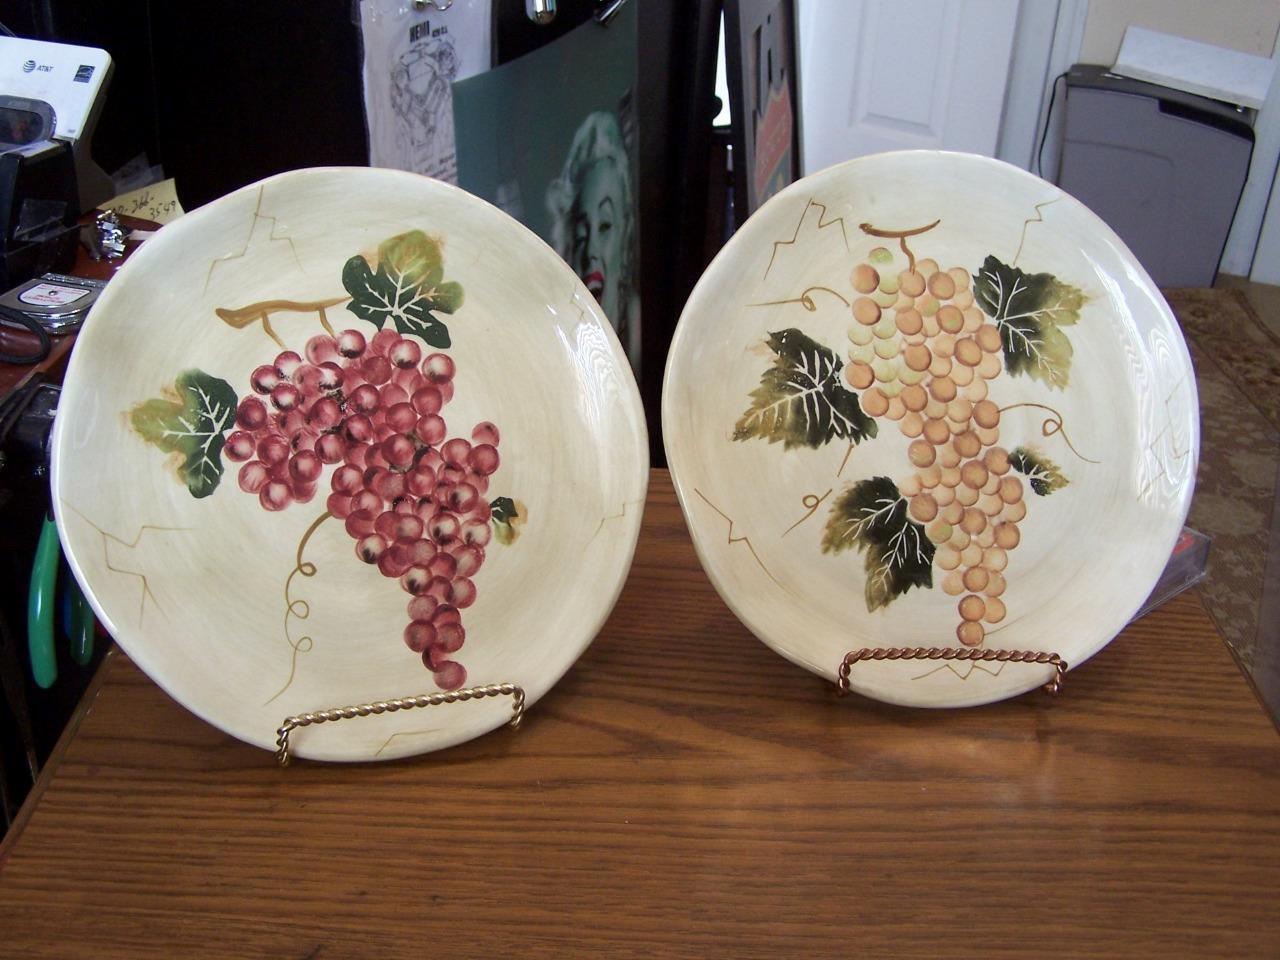 4 Tabletops Gallery Cabernet Salad Plate Hand Painted Grapes 8.5” excellent